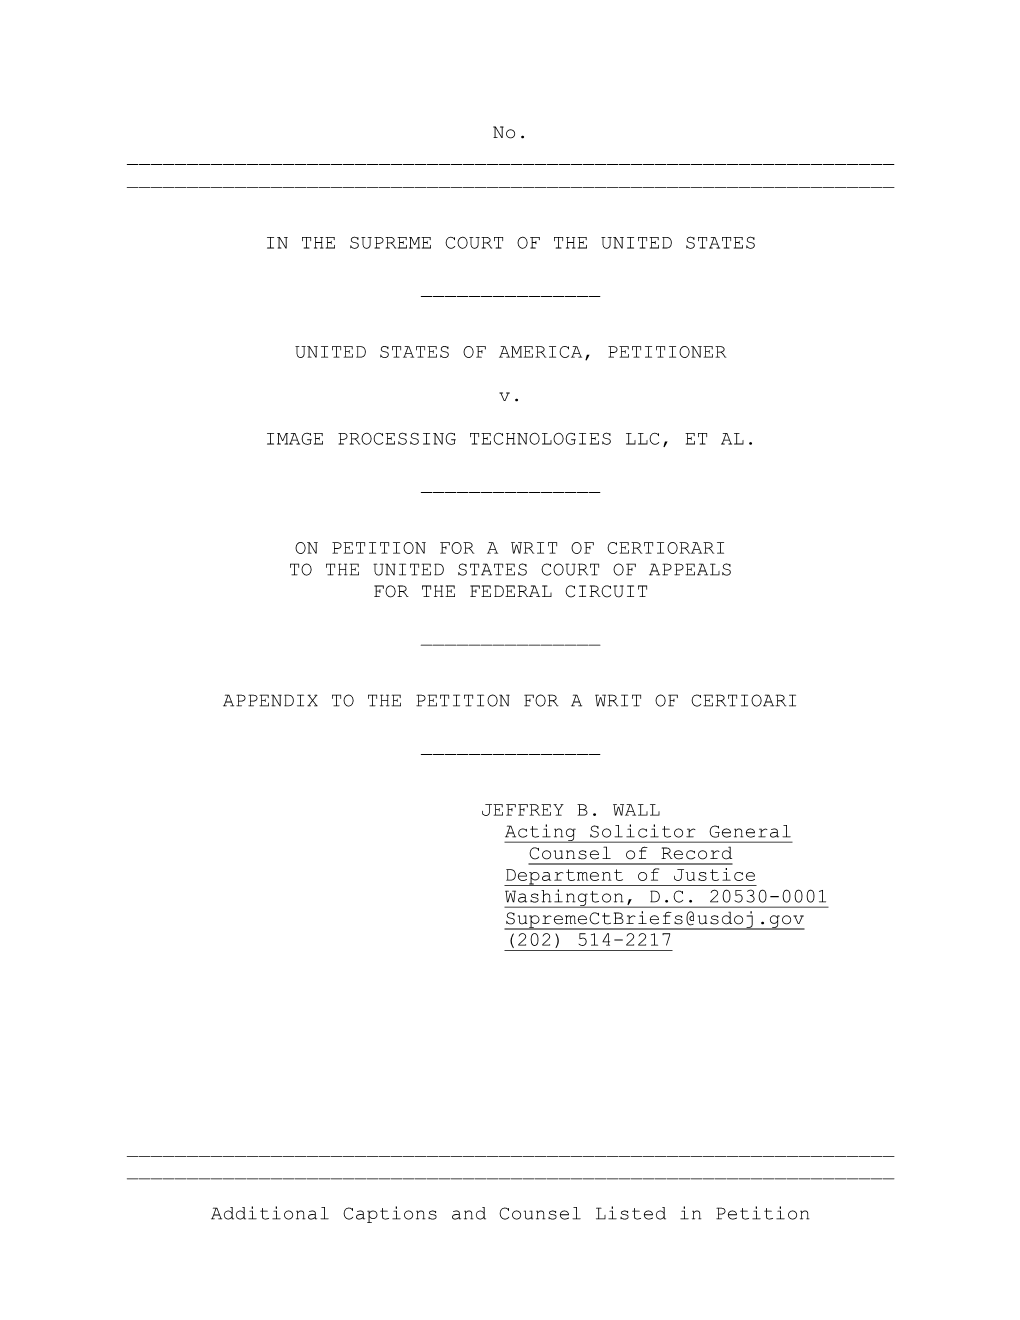 Appendix to the Petition for a Writ of Certioari